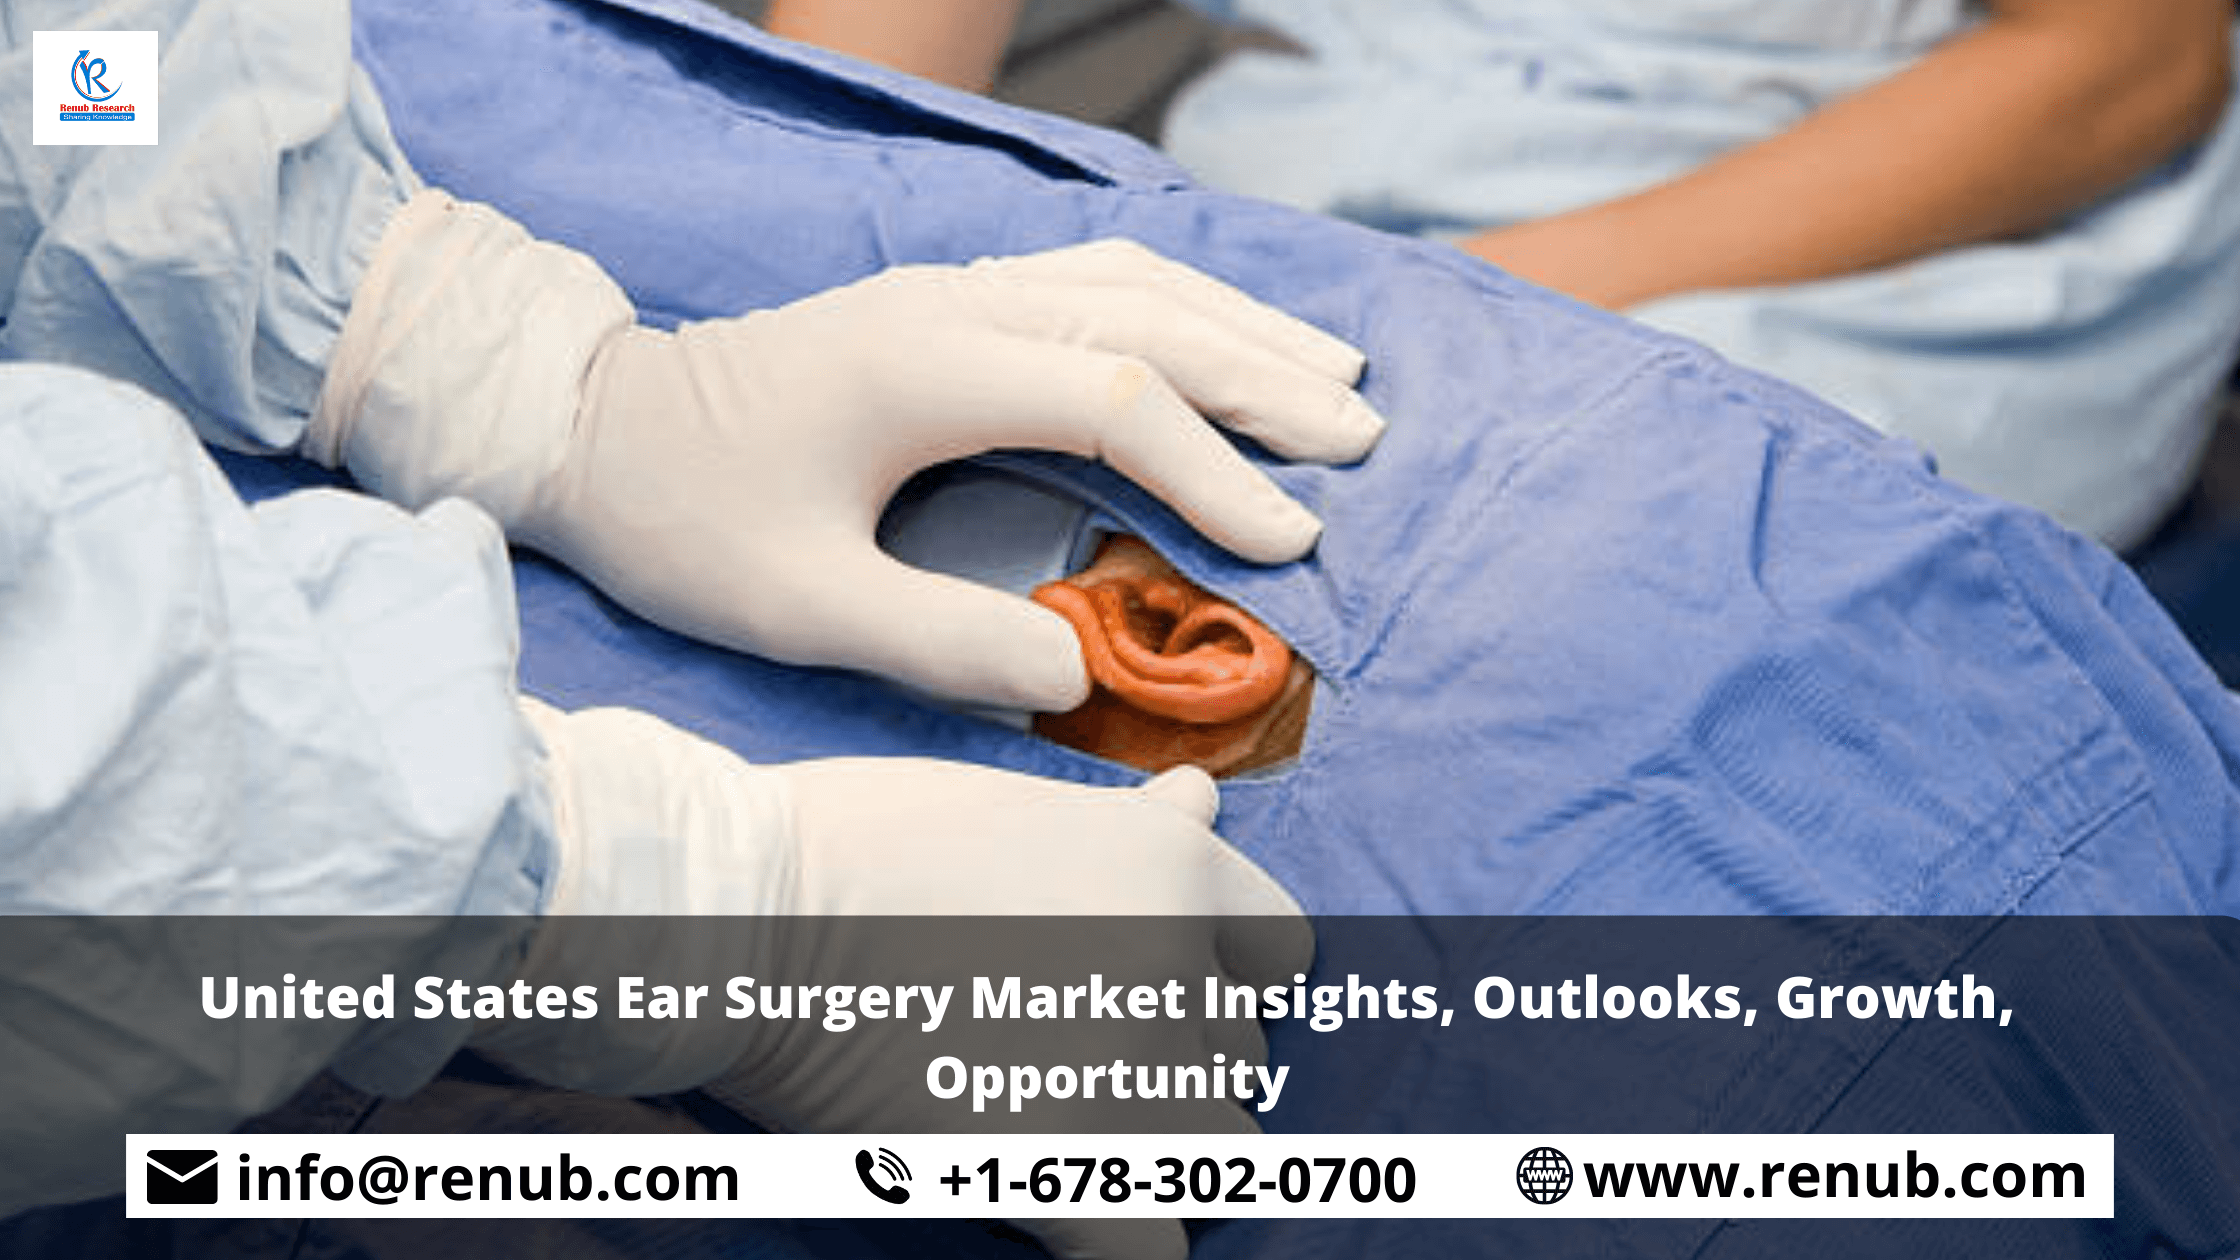 United States Ear Surgery Market Insights, Outlooks, Growth, Opportunity | Renub Research